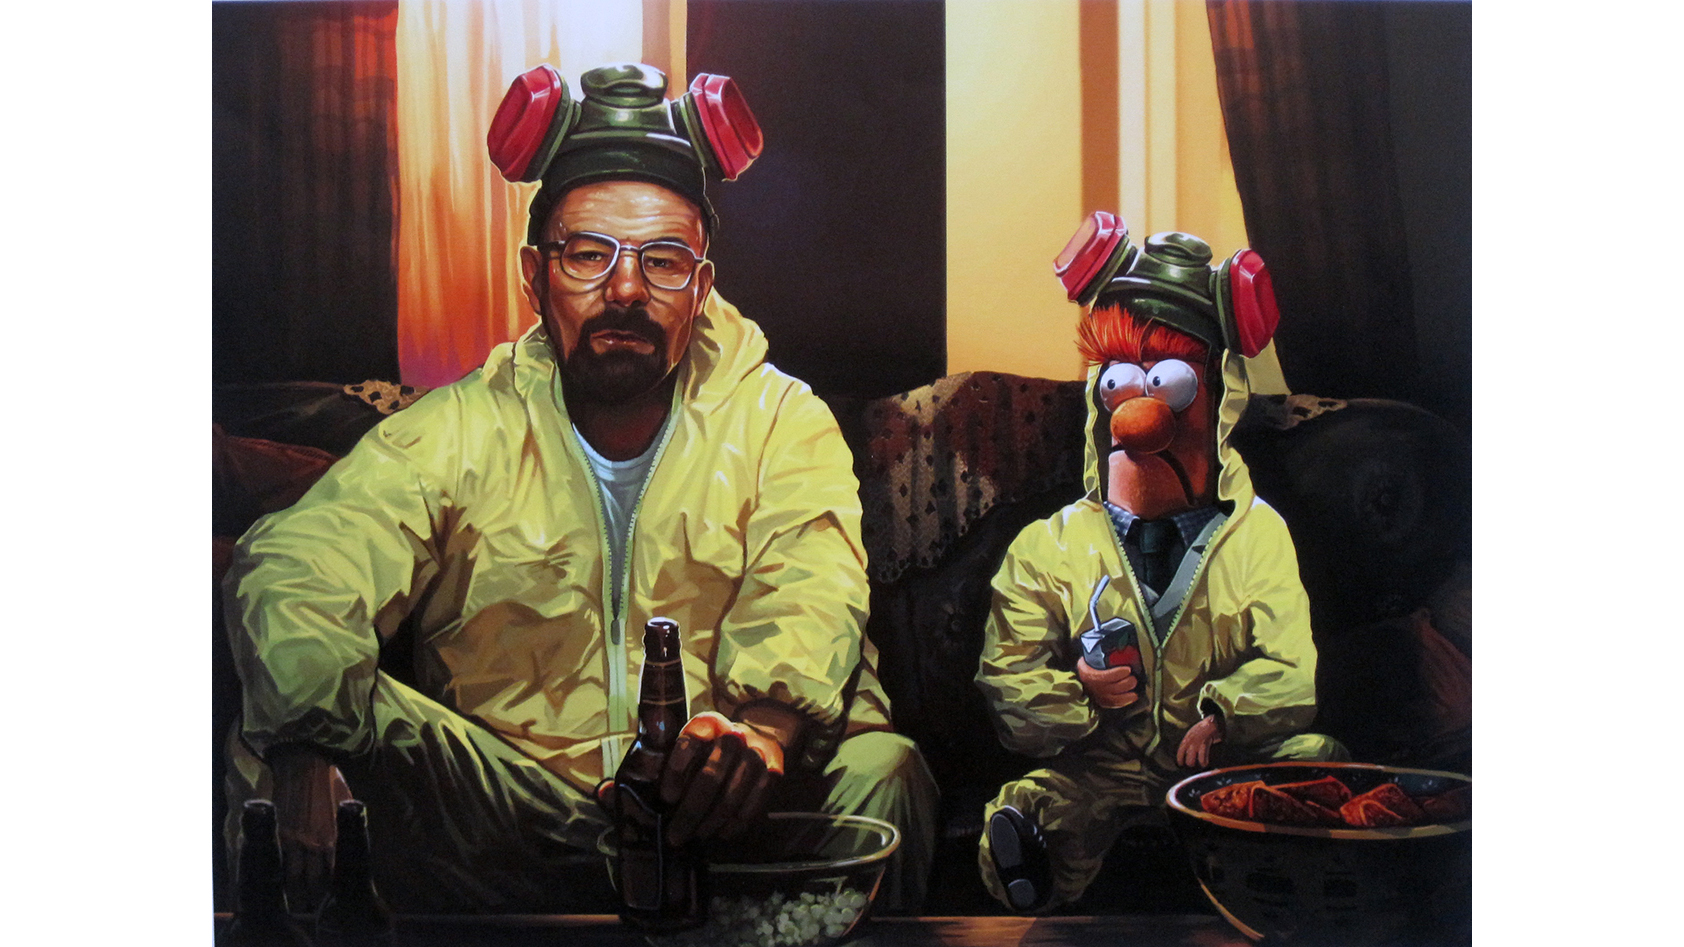 An illustration featuring Breaking Bad and Muppets characters